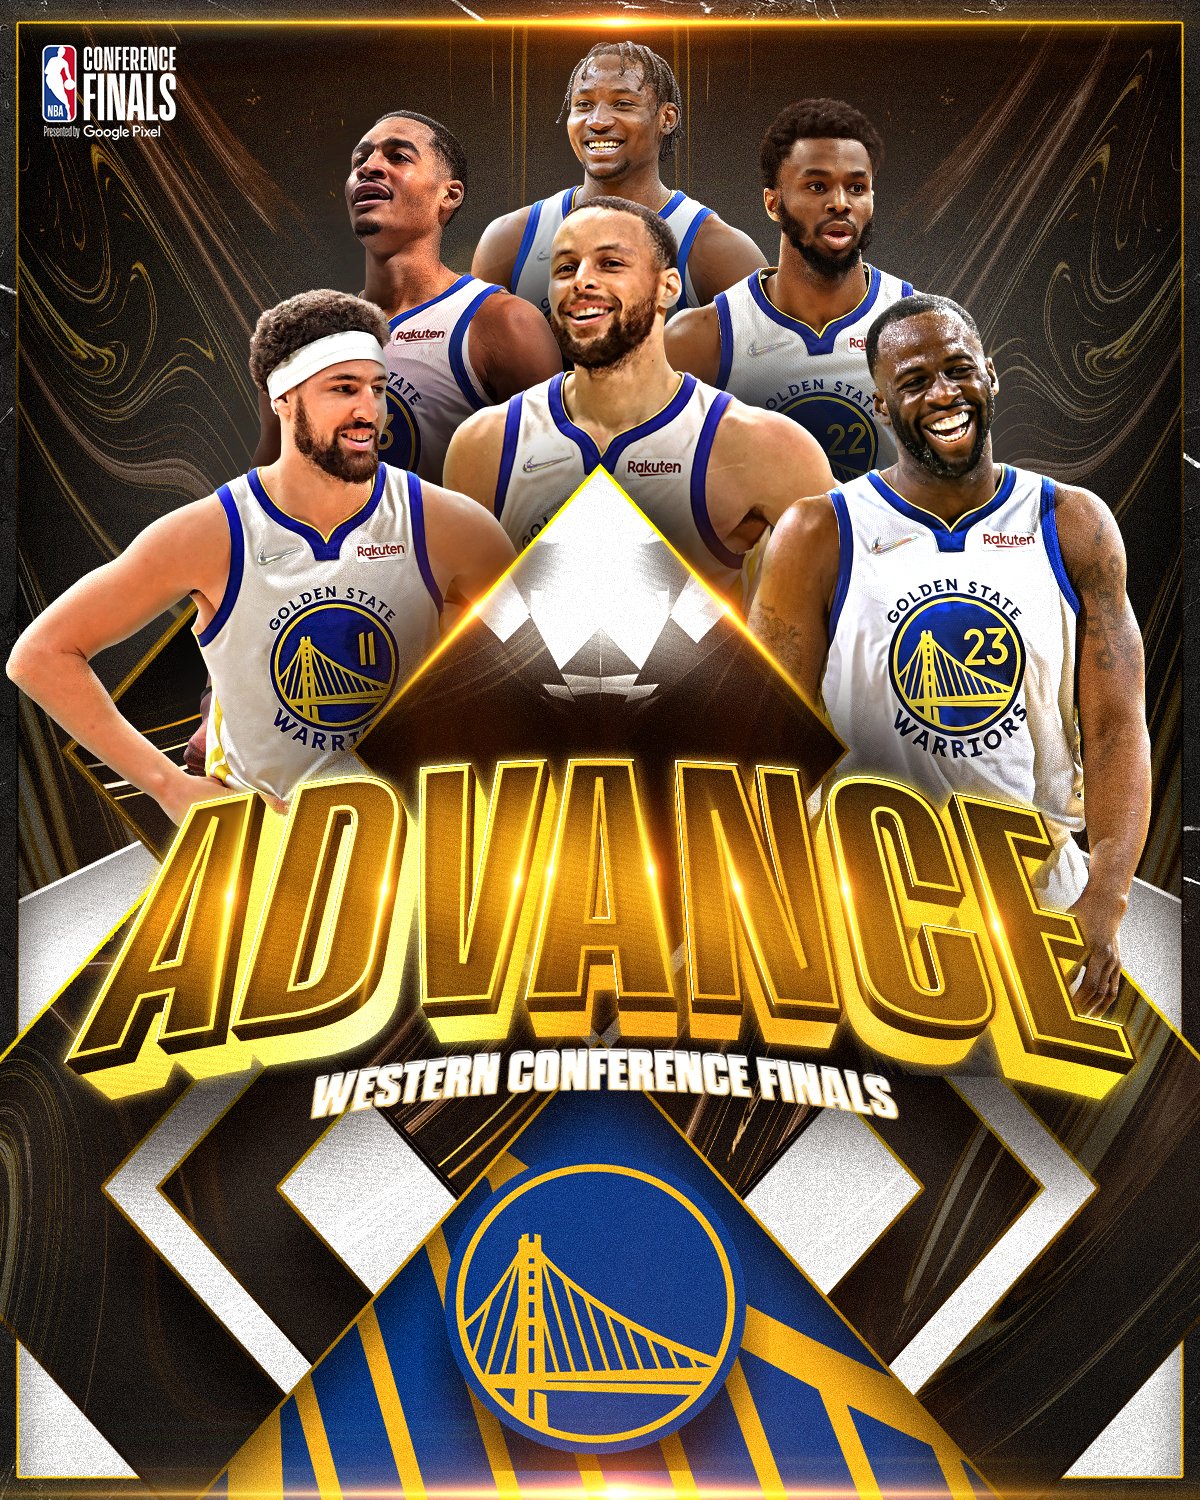 NBA advance to the Western Conference Finals! #NBAPlayoffs presented